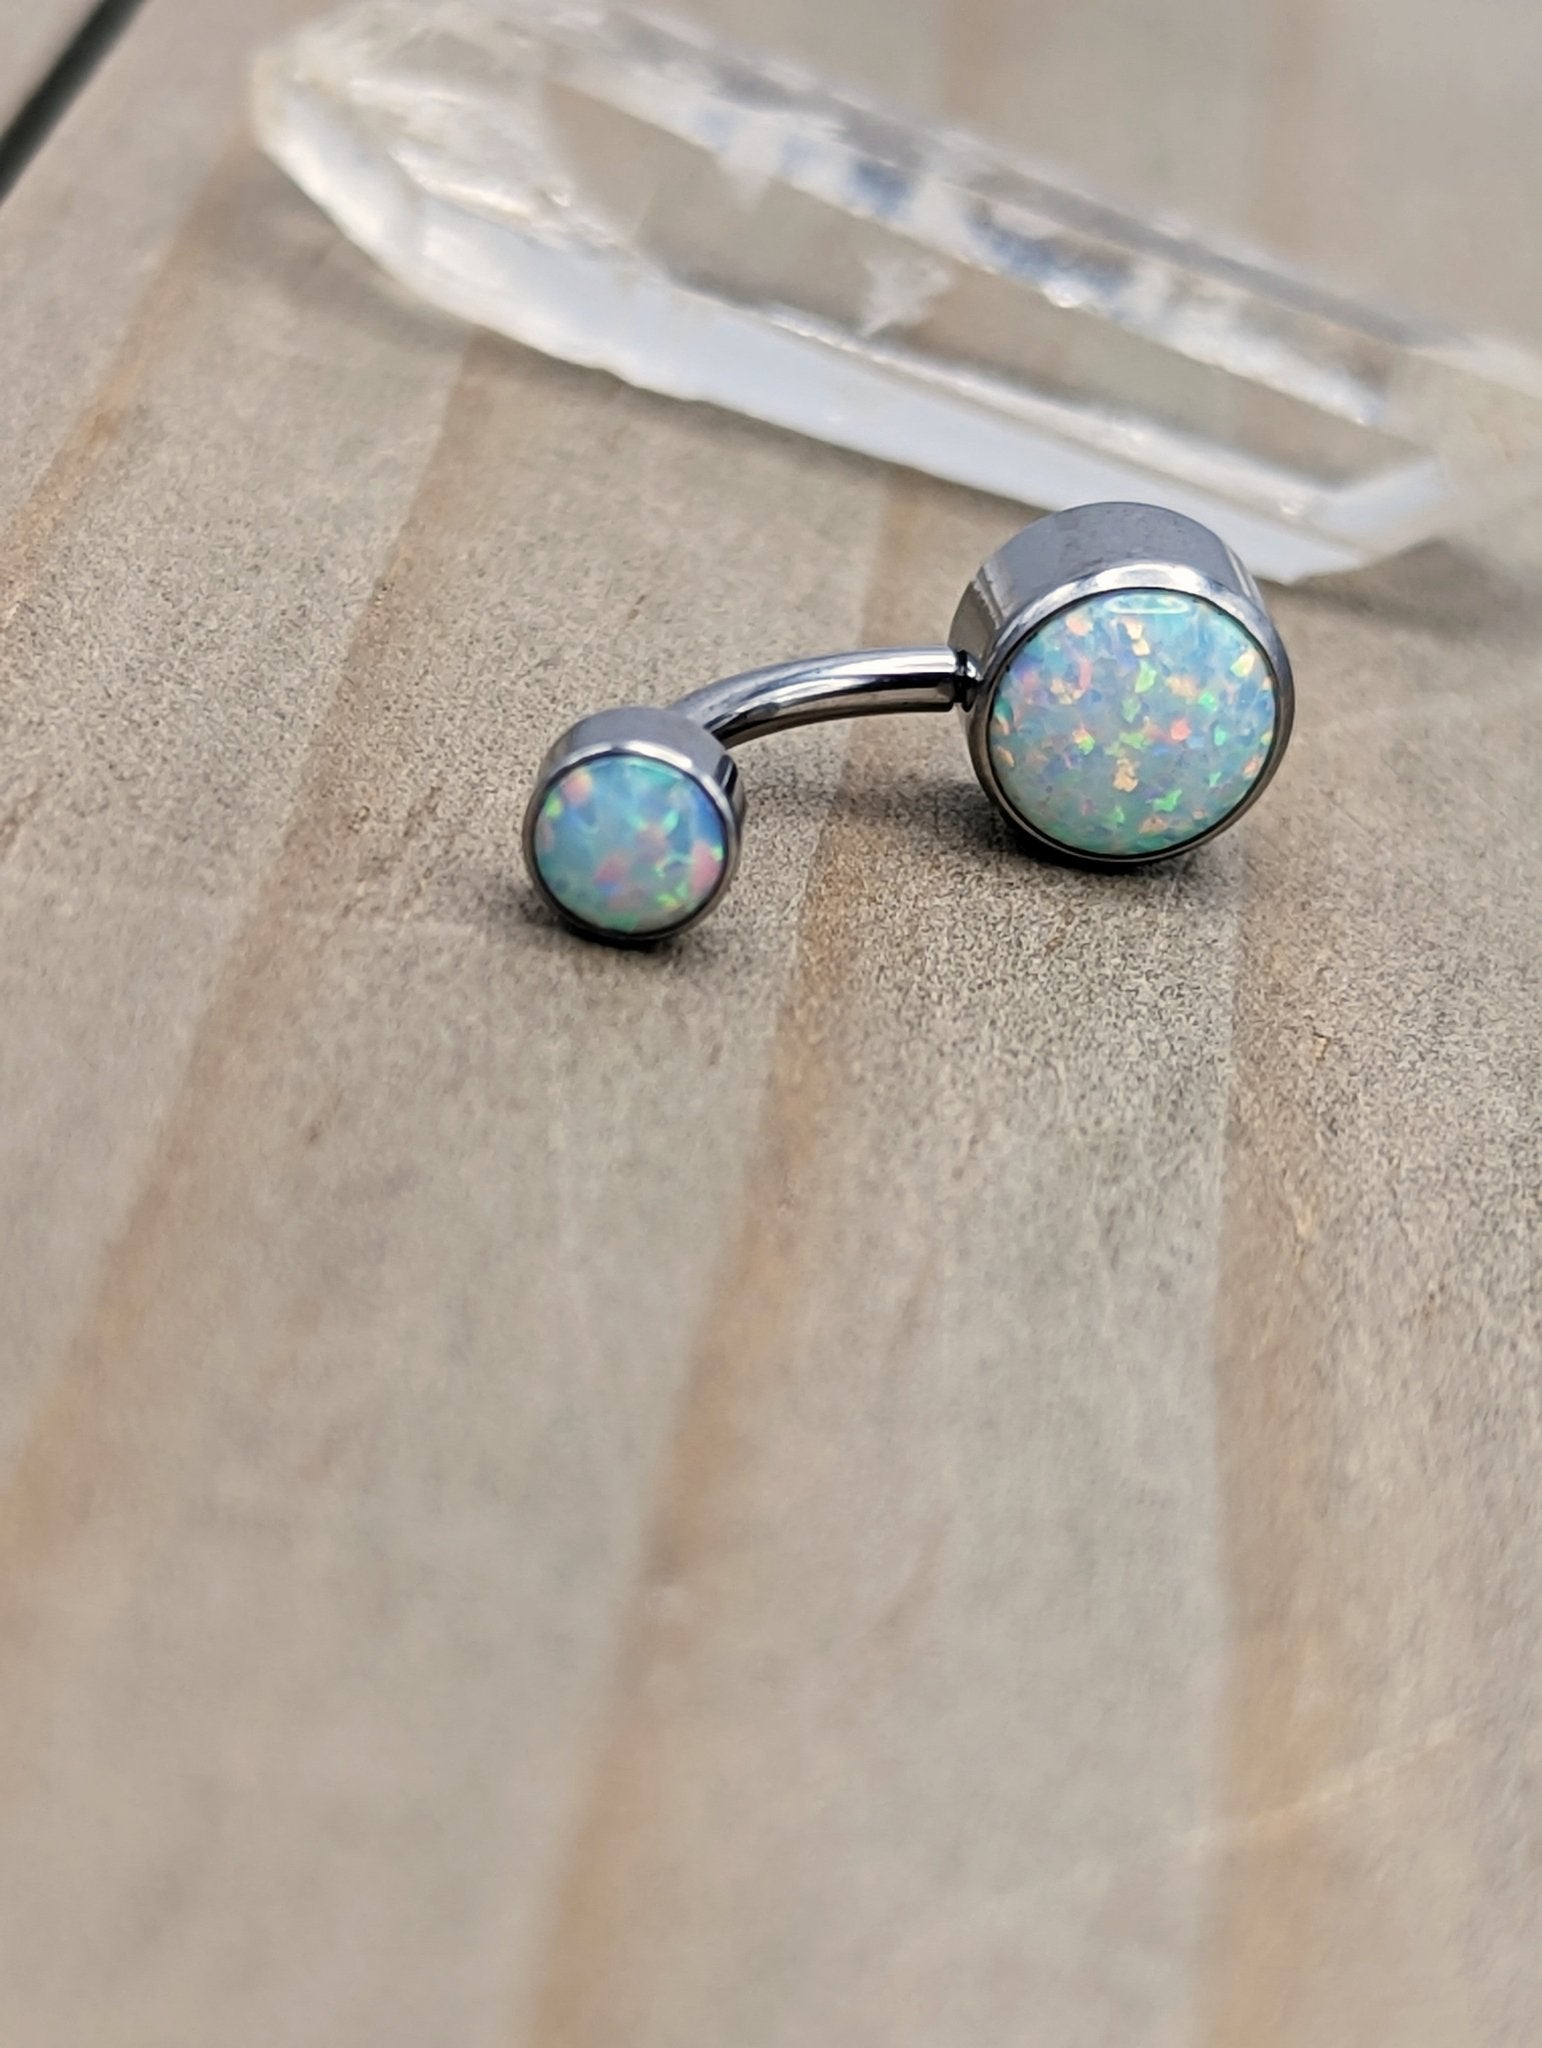 Titanium white opal belly button ring VCH curve 14g internally threaded bezel set pick your anodized color - Siren Body Jewelry